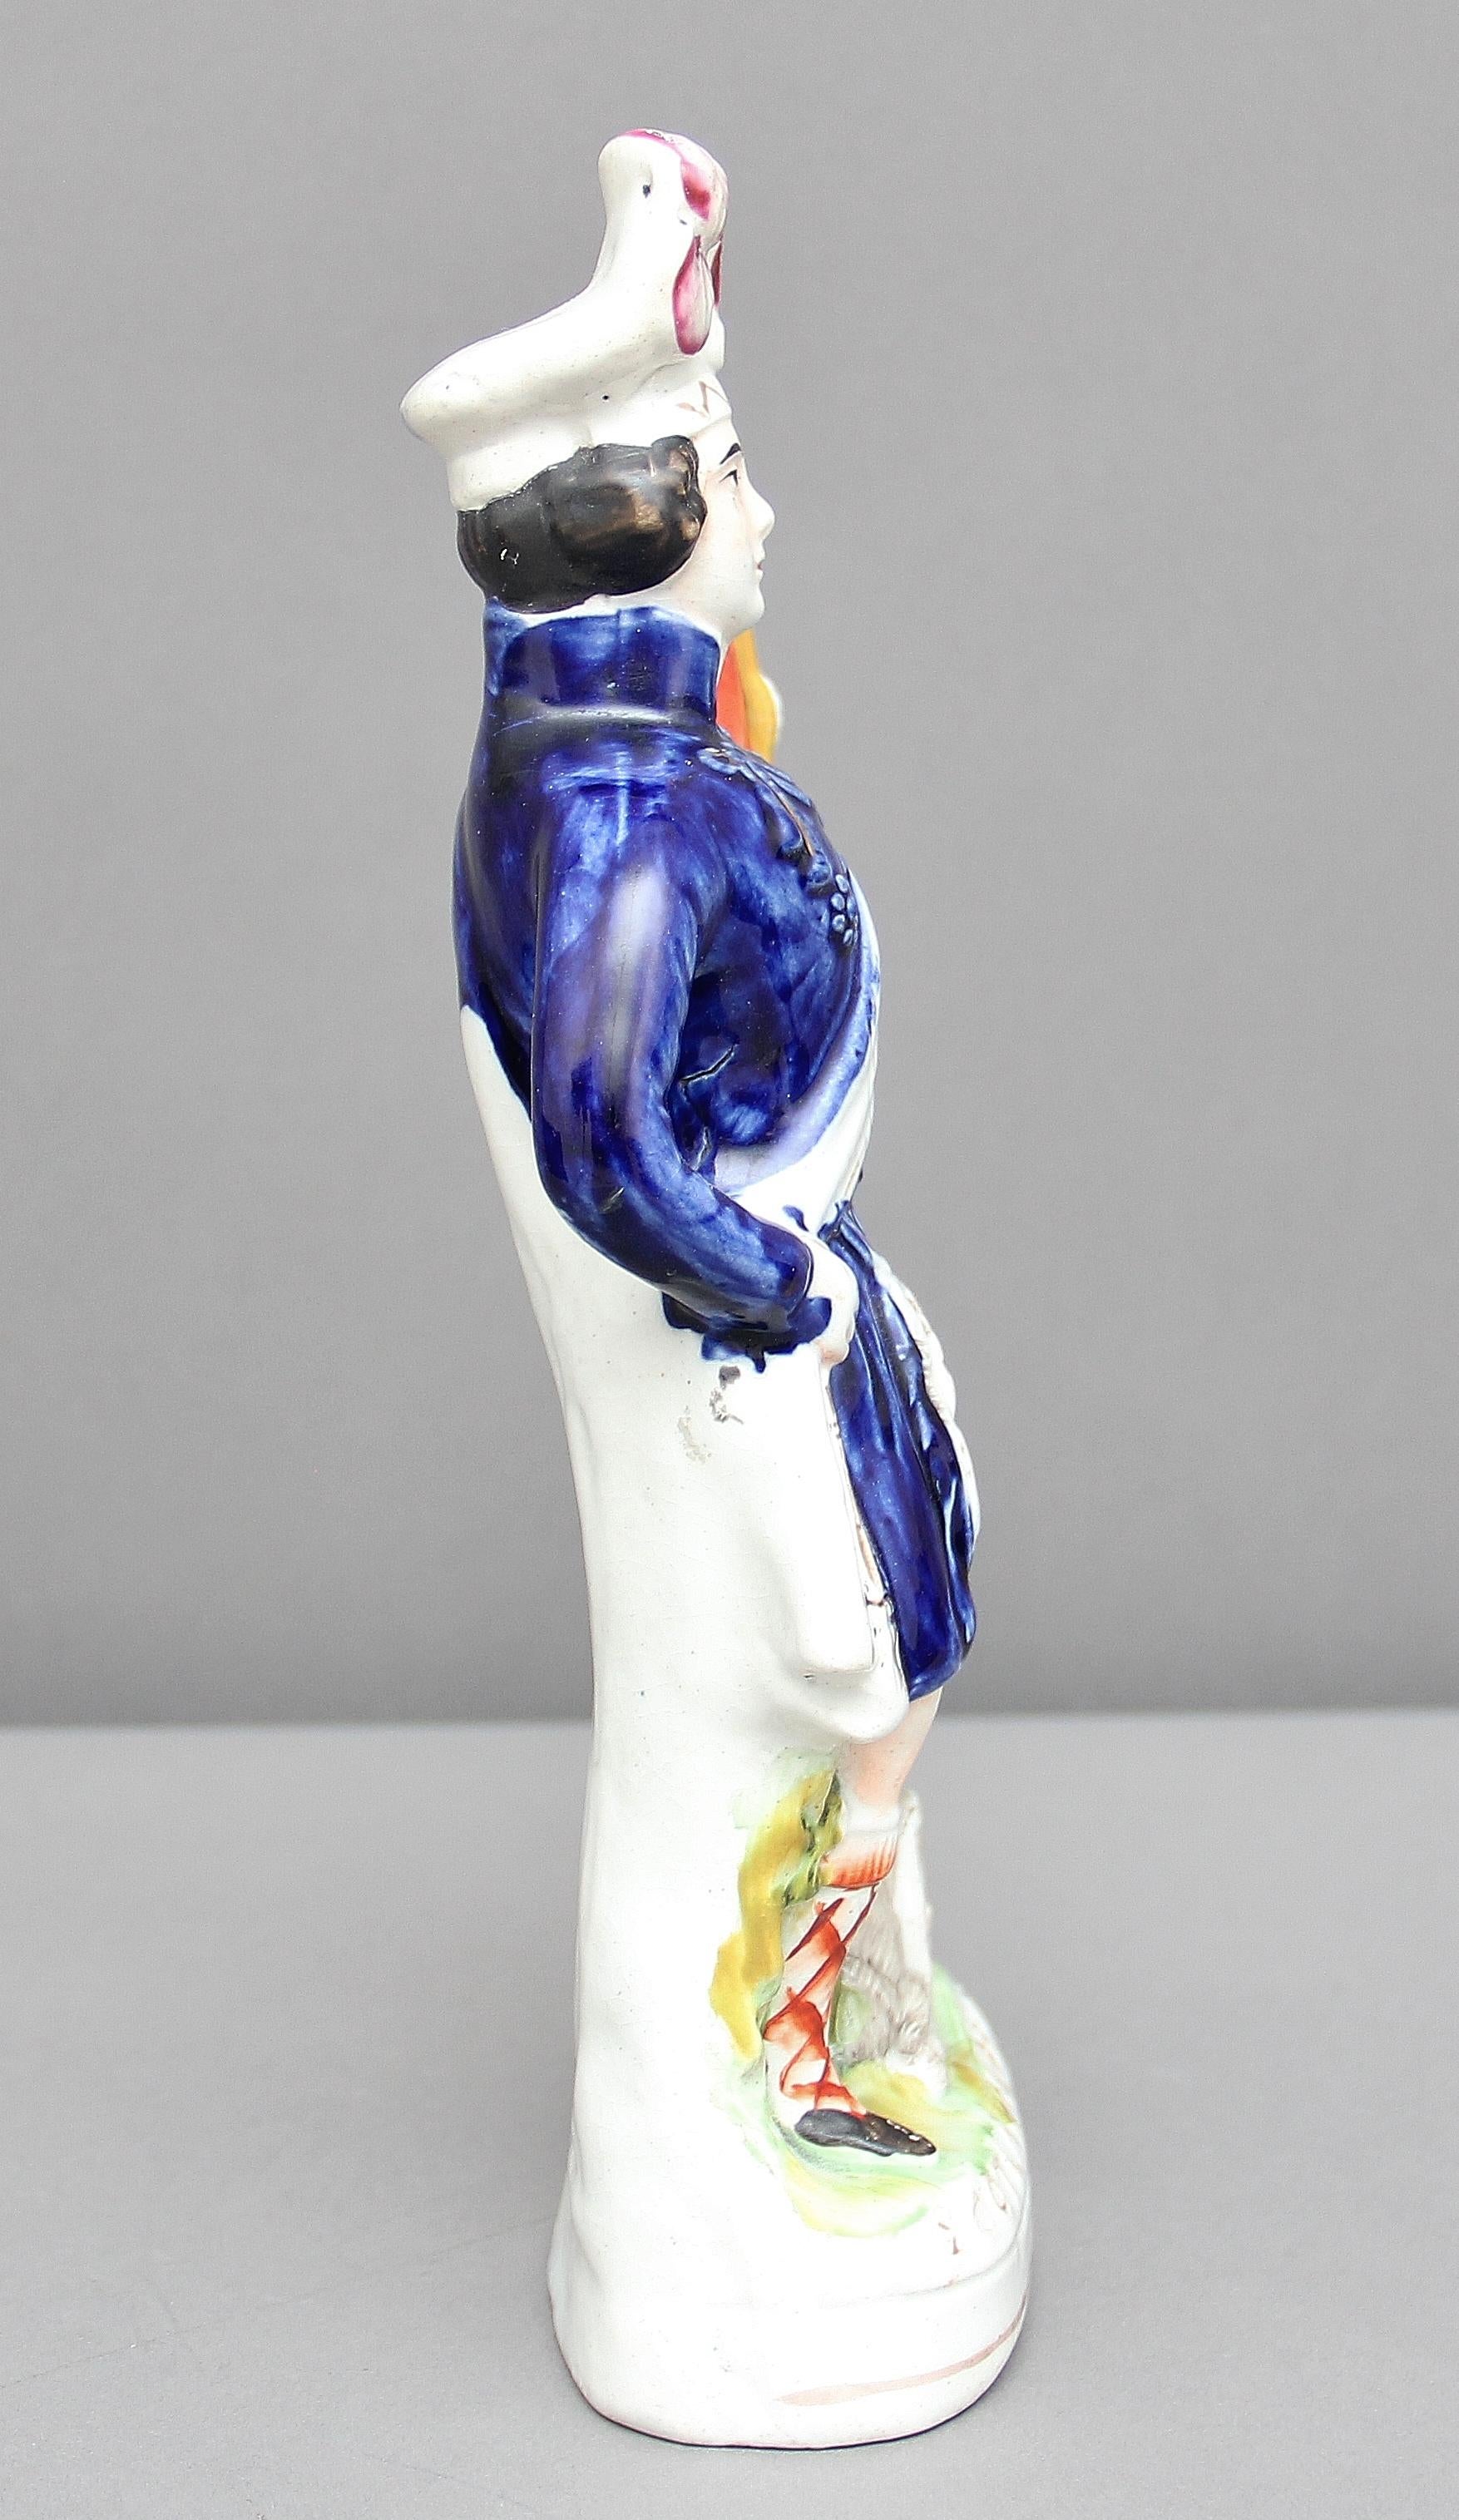 19th century Staffordshire figure titled “Scotland’s Pride” showing a Scotsman holding a flag with a canon at his feet. Good color and in great condition, circa 1854.
 